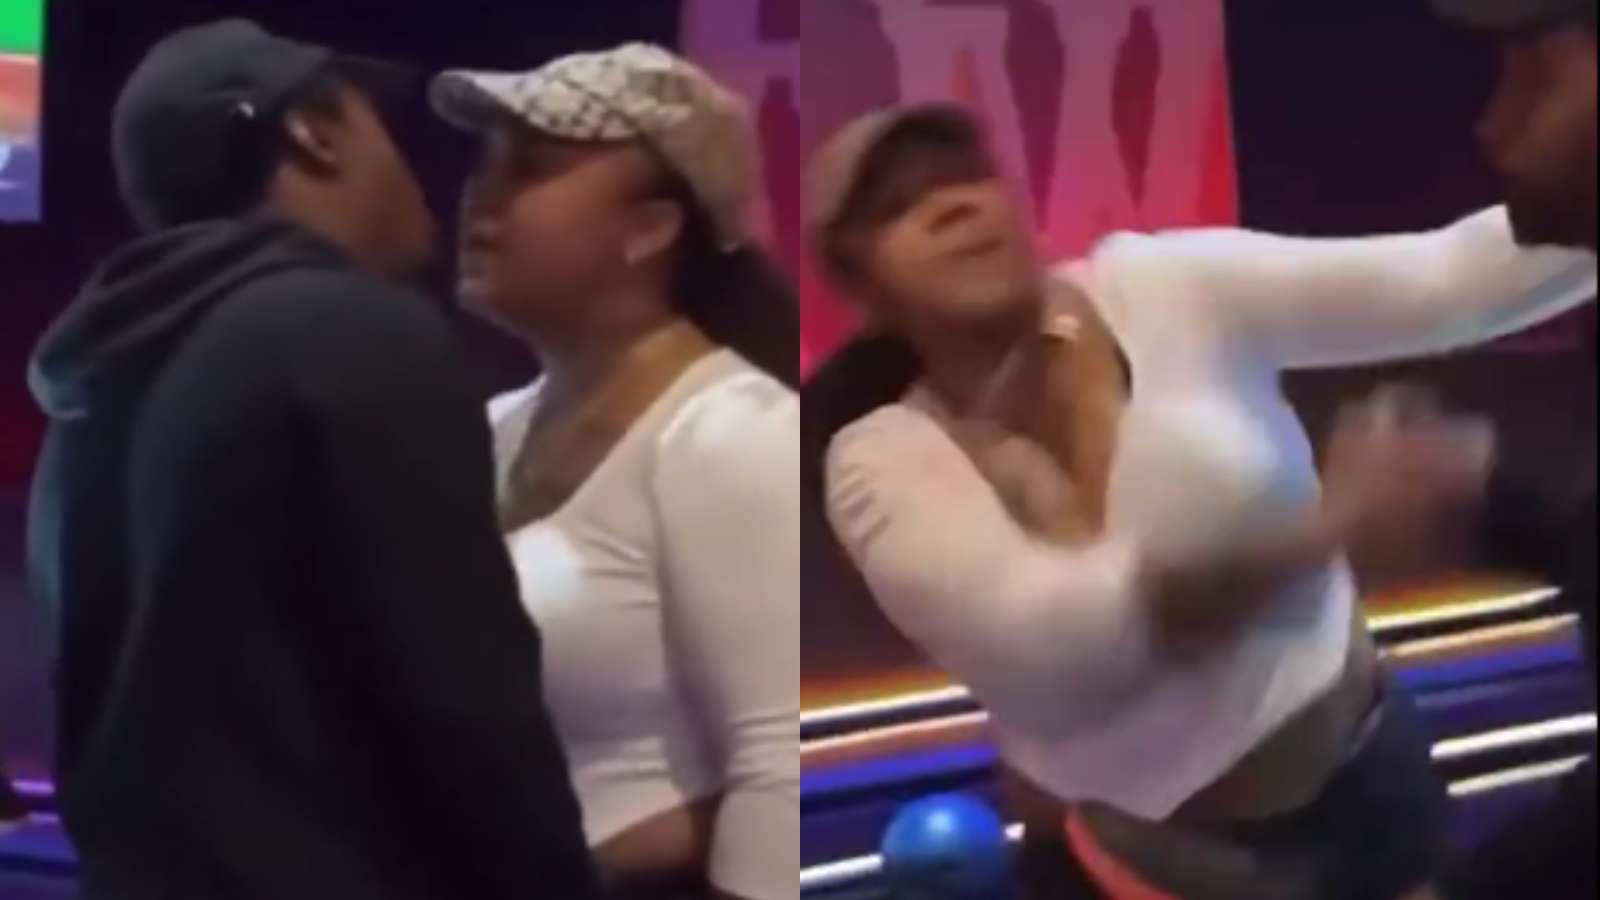 woman KOs her date with a bowling ball